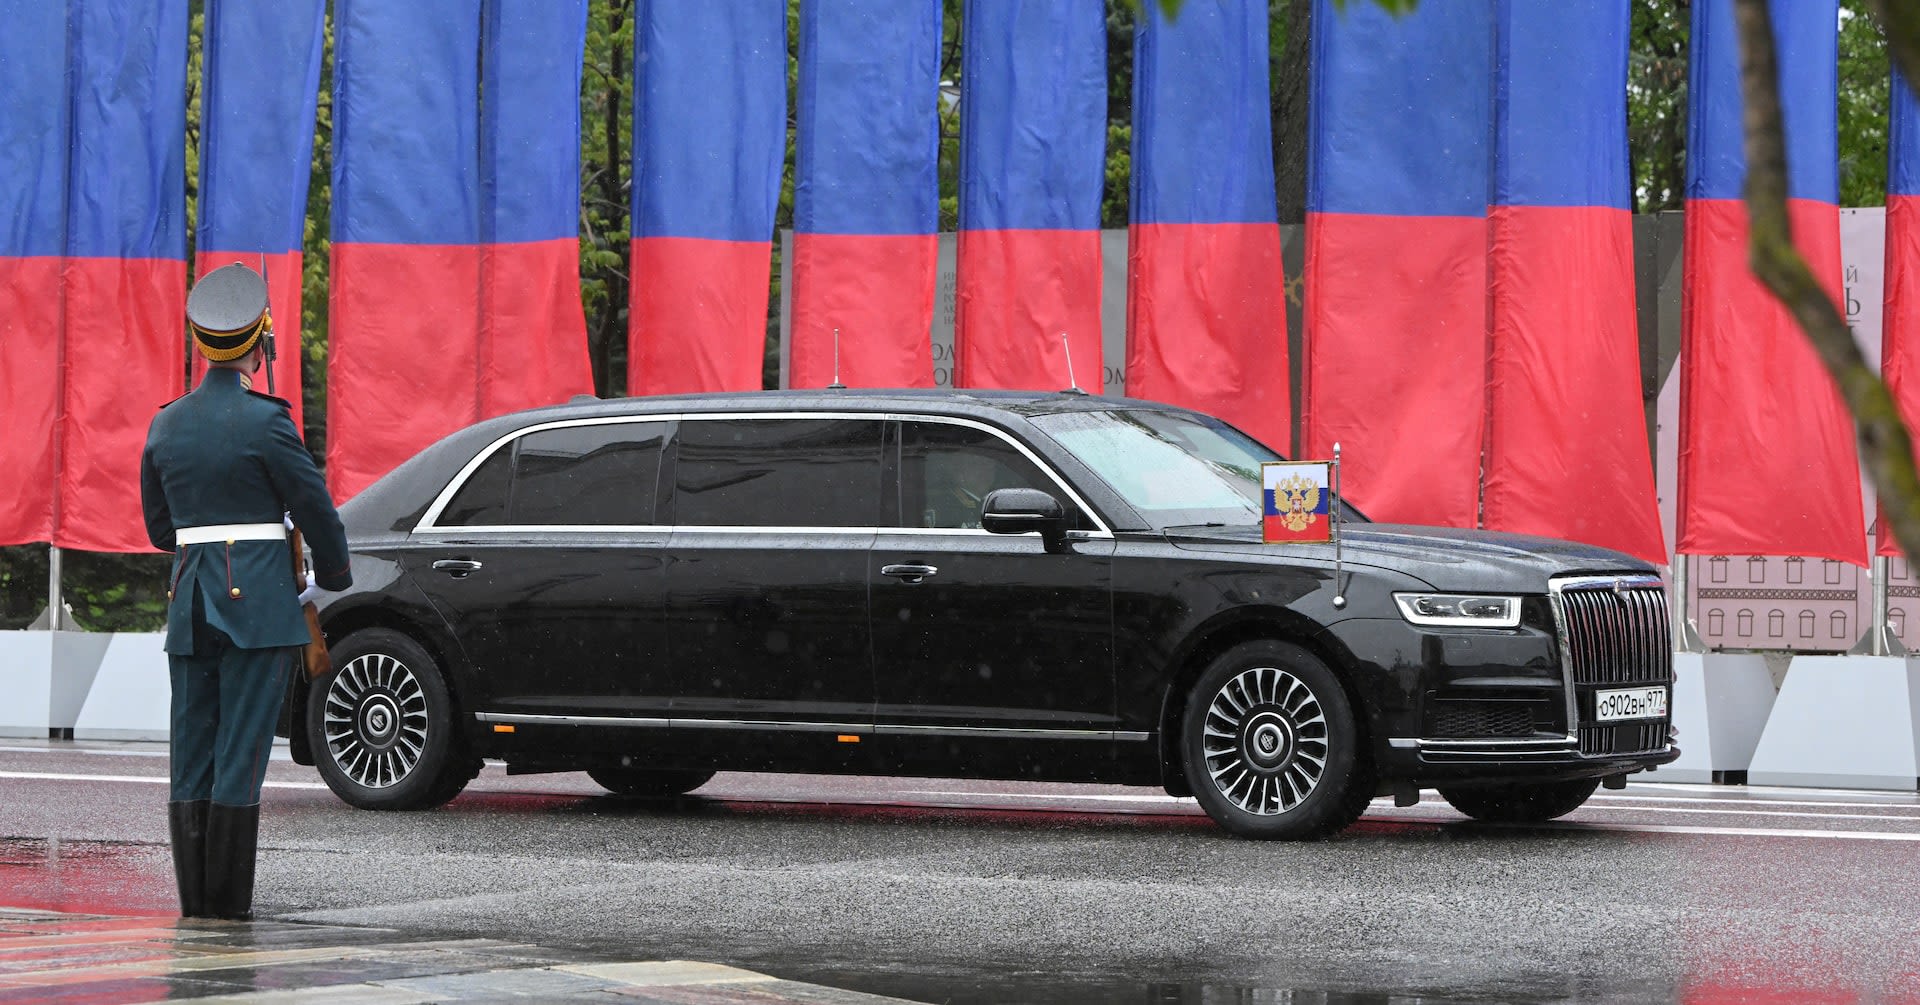 Russia to start production of Putin's limousine at a former Toyota plant